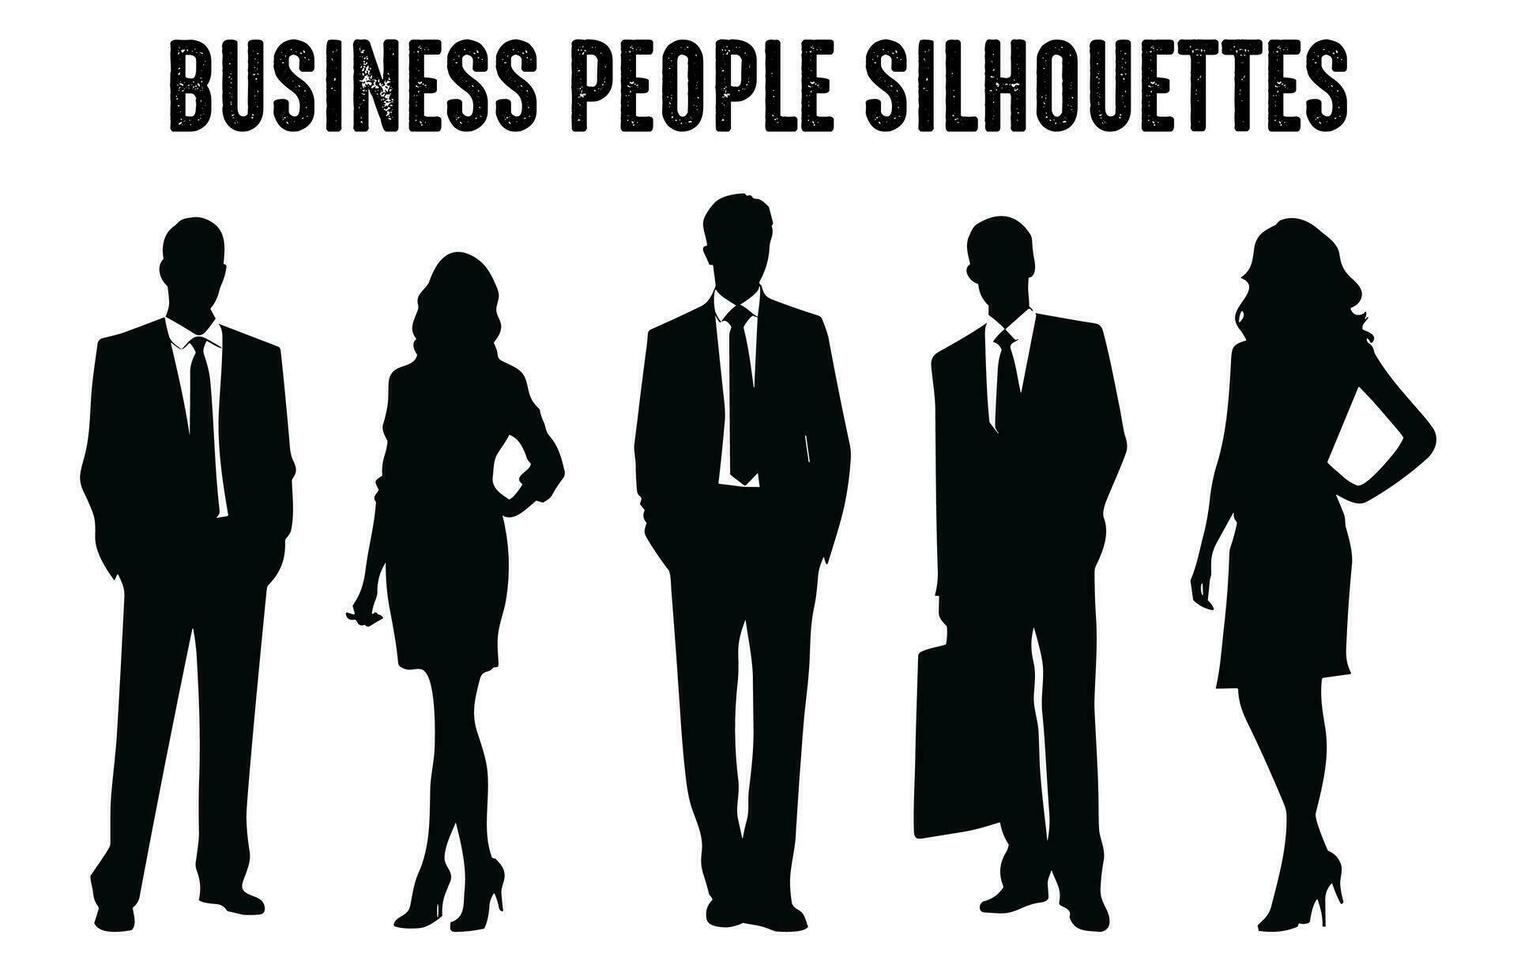 Business people vector Silhouettes Set, Corporate Men and Women silhouette Bundle